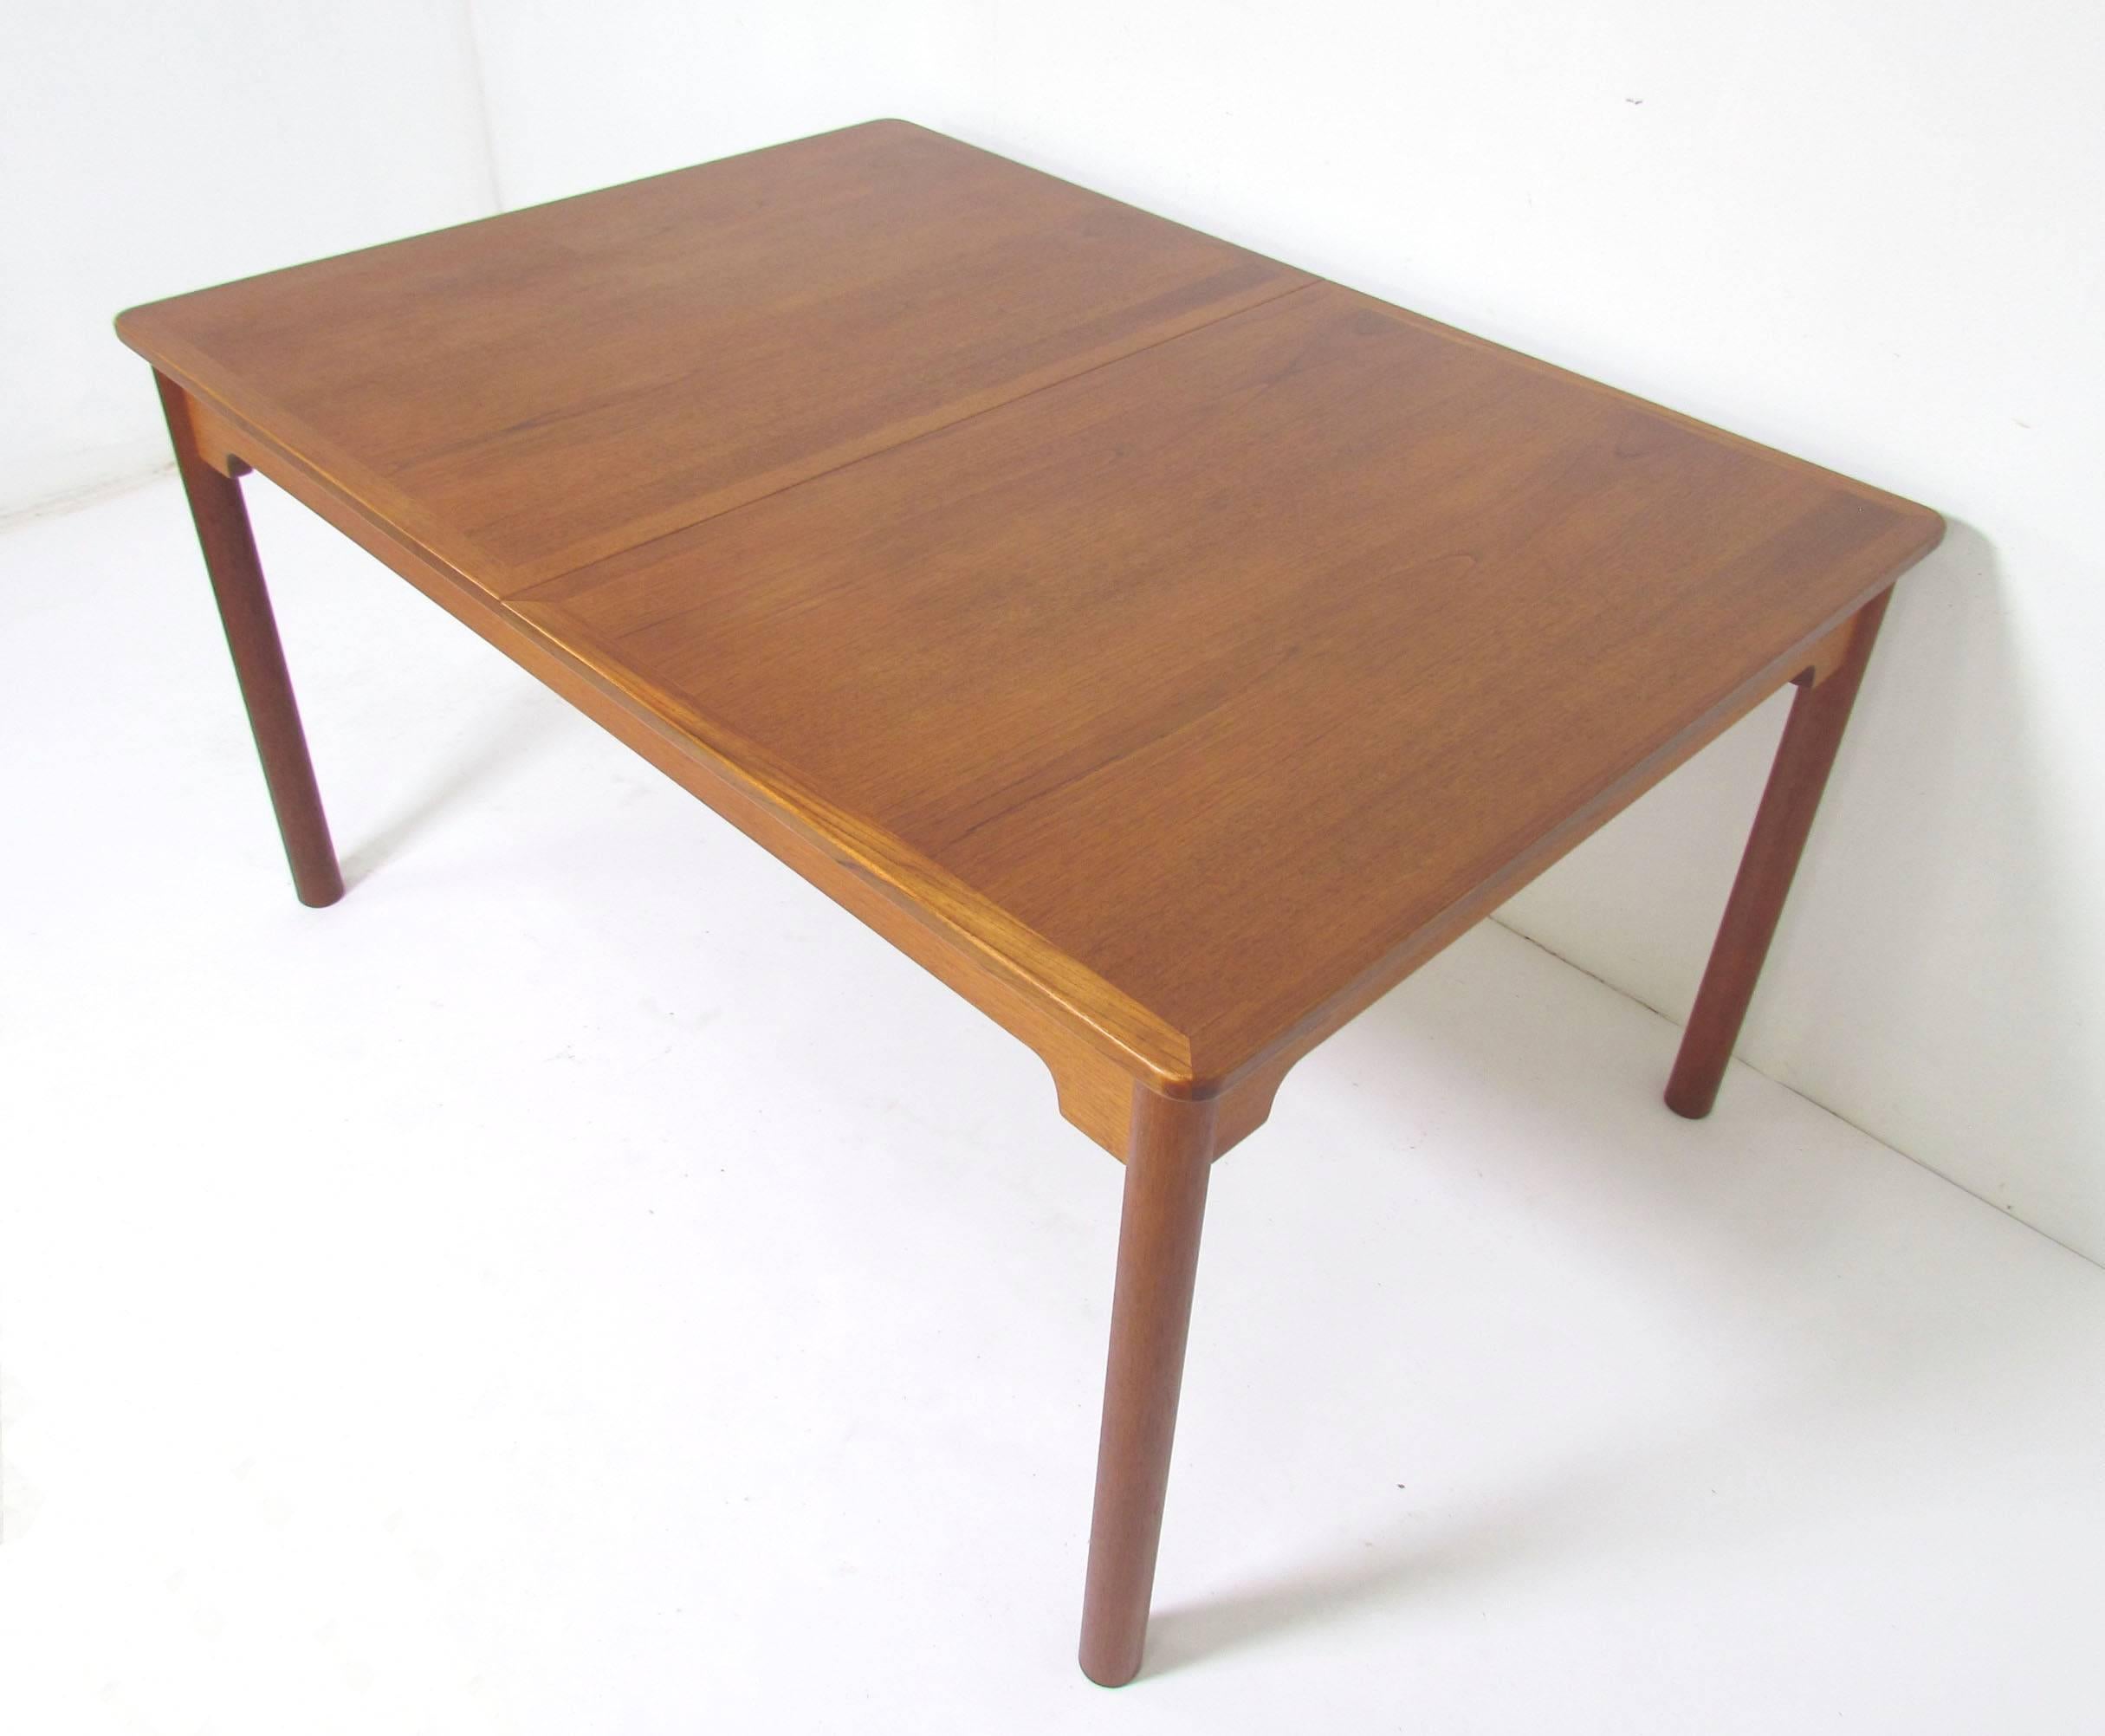 Handsome teak dining table on cylinder legs with carved underskirt, designed by Børge Mogensen for AB Karl Andersson & Soner, Sweden, circa 1960s. Includes two leaves that store under the table center.

Measures 55